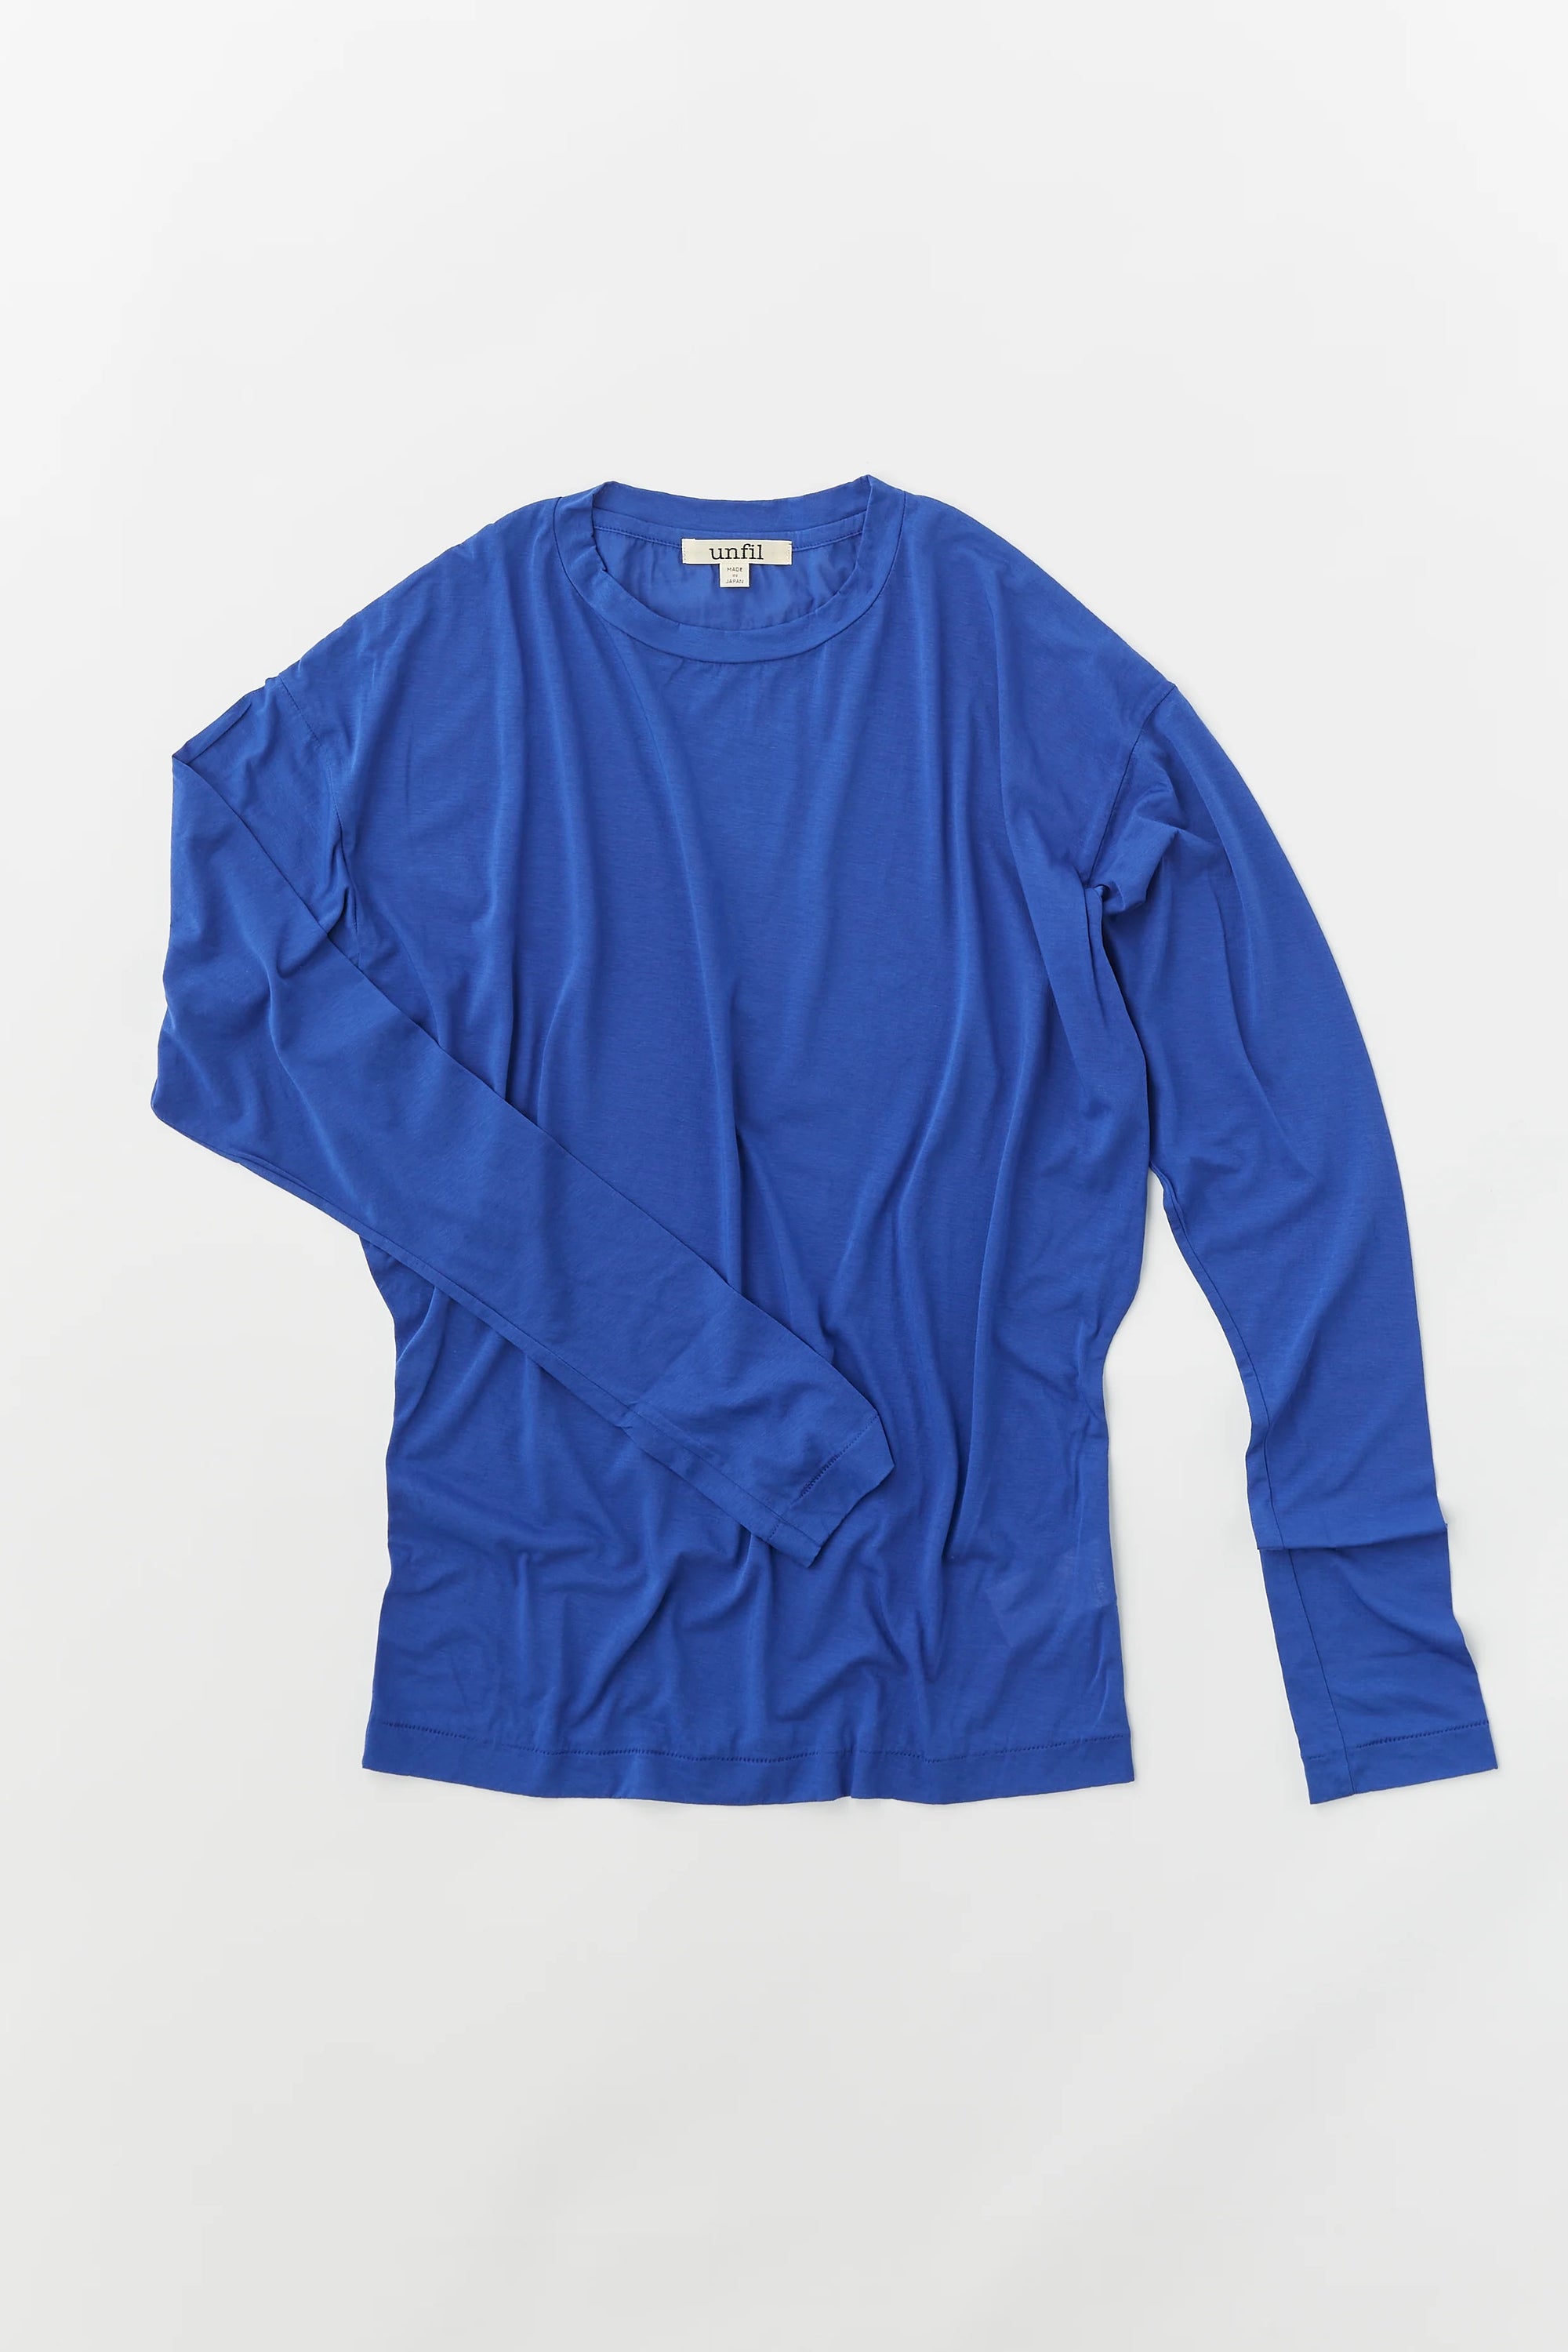 Unfil  twisted cotton sheer jersey long sleeve Tee, , Lapis Blue